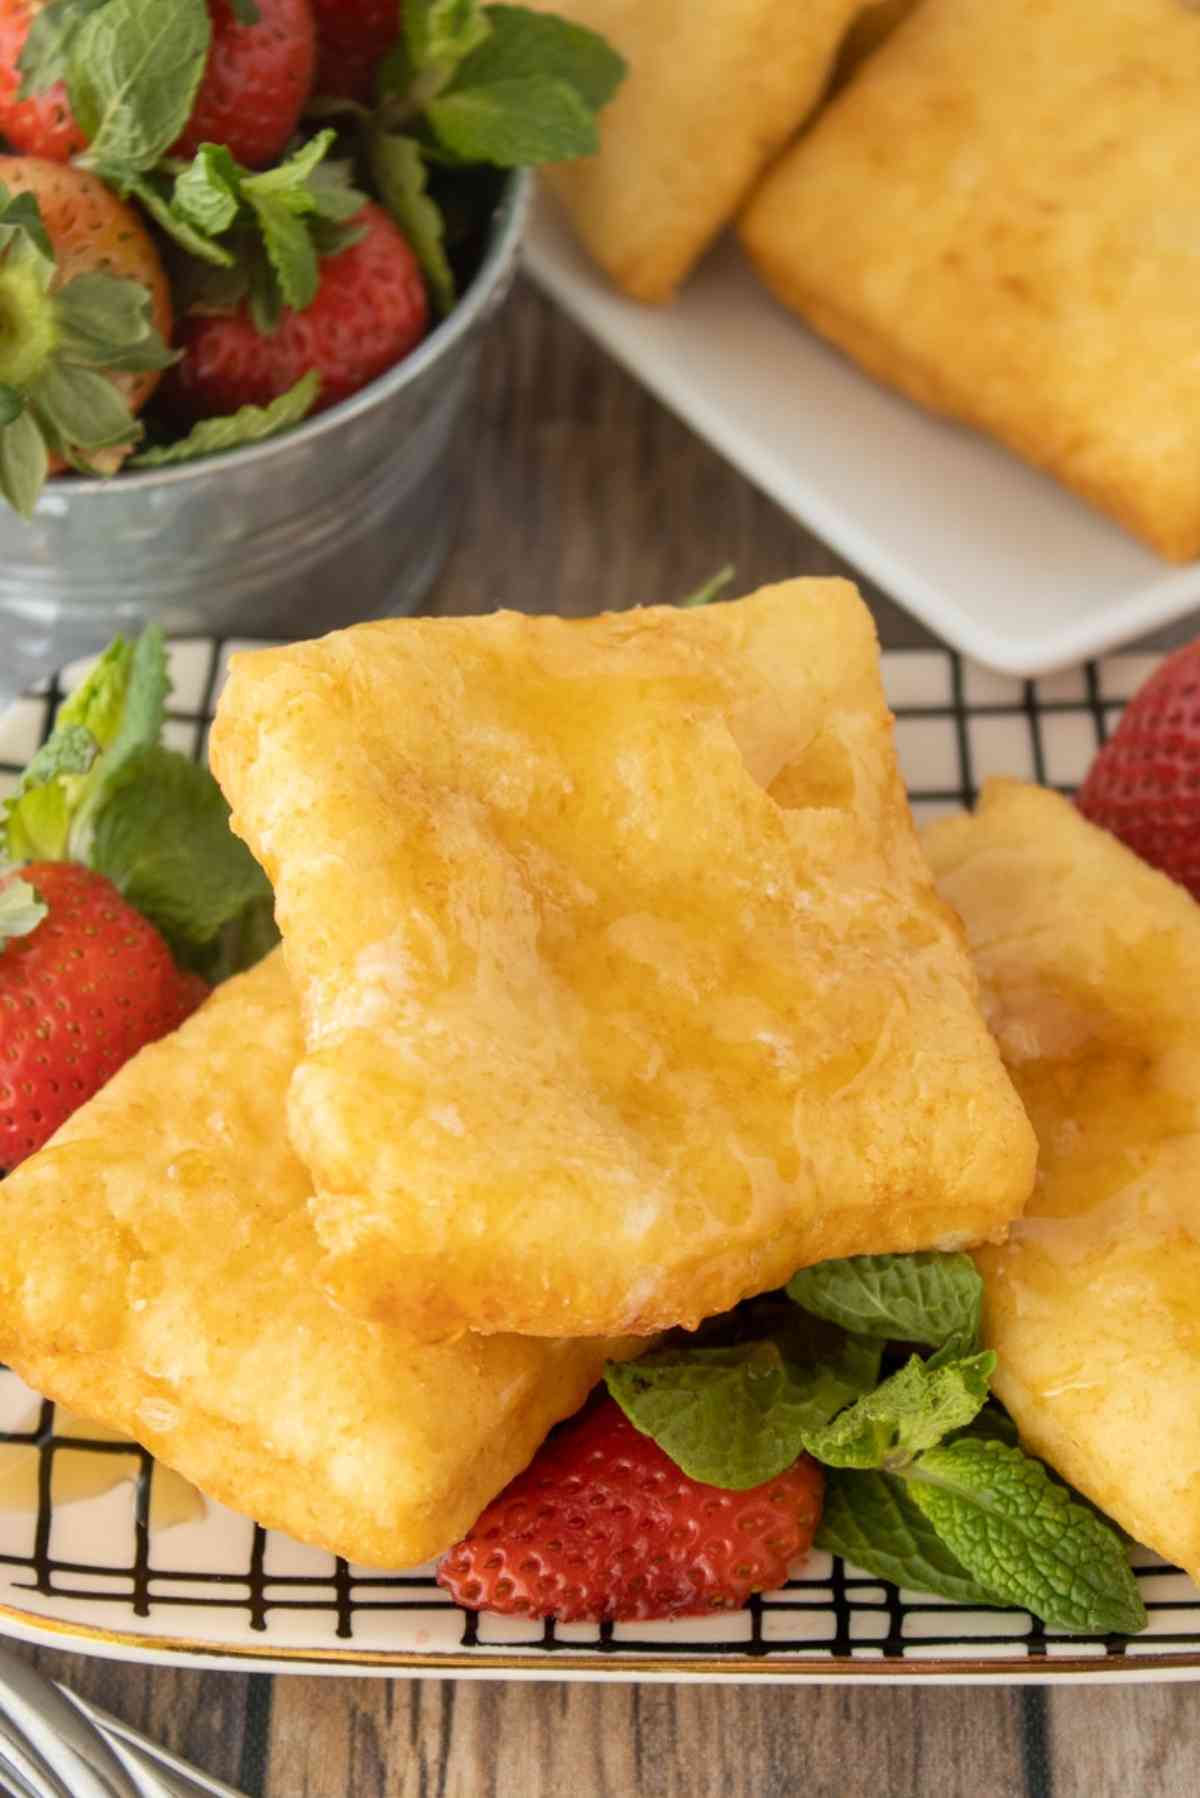 Fried scones on a plate with fresh strawberries.